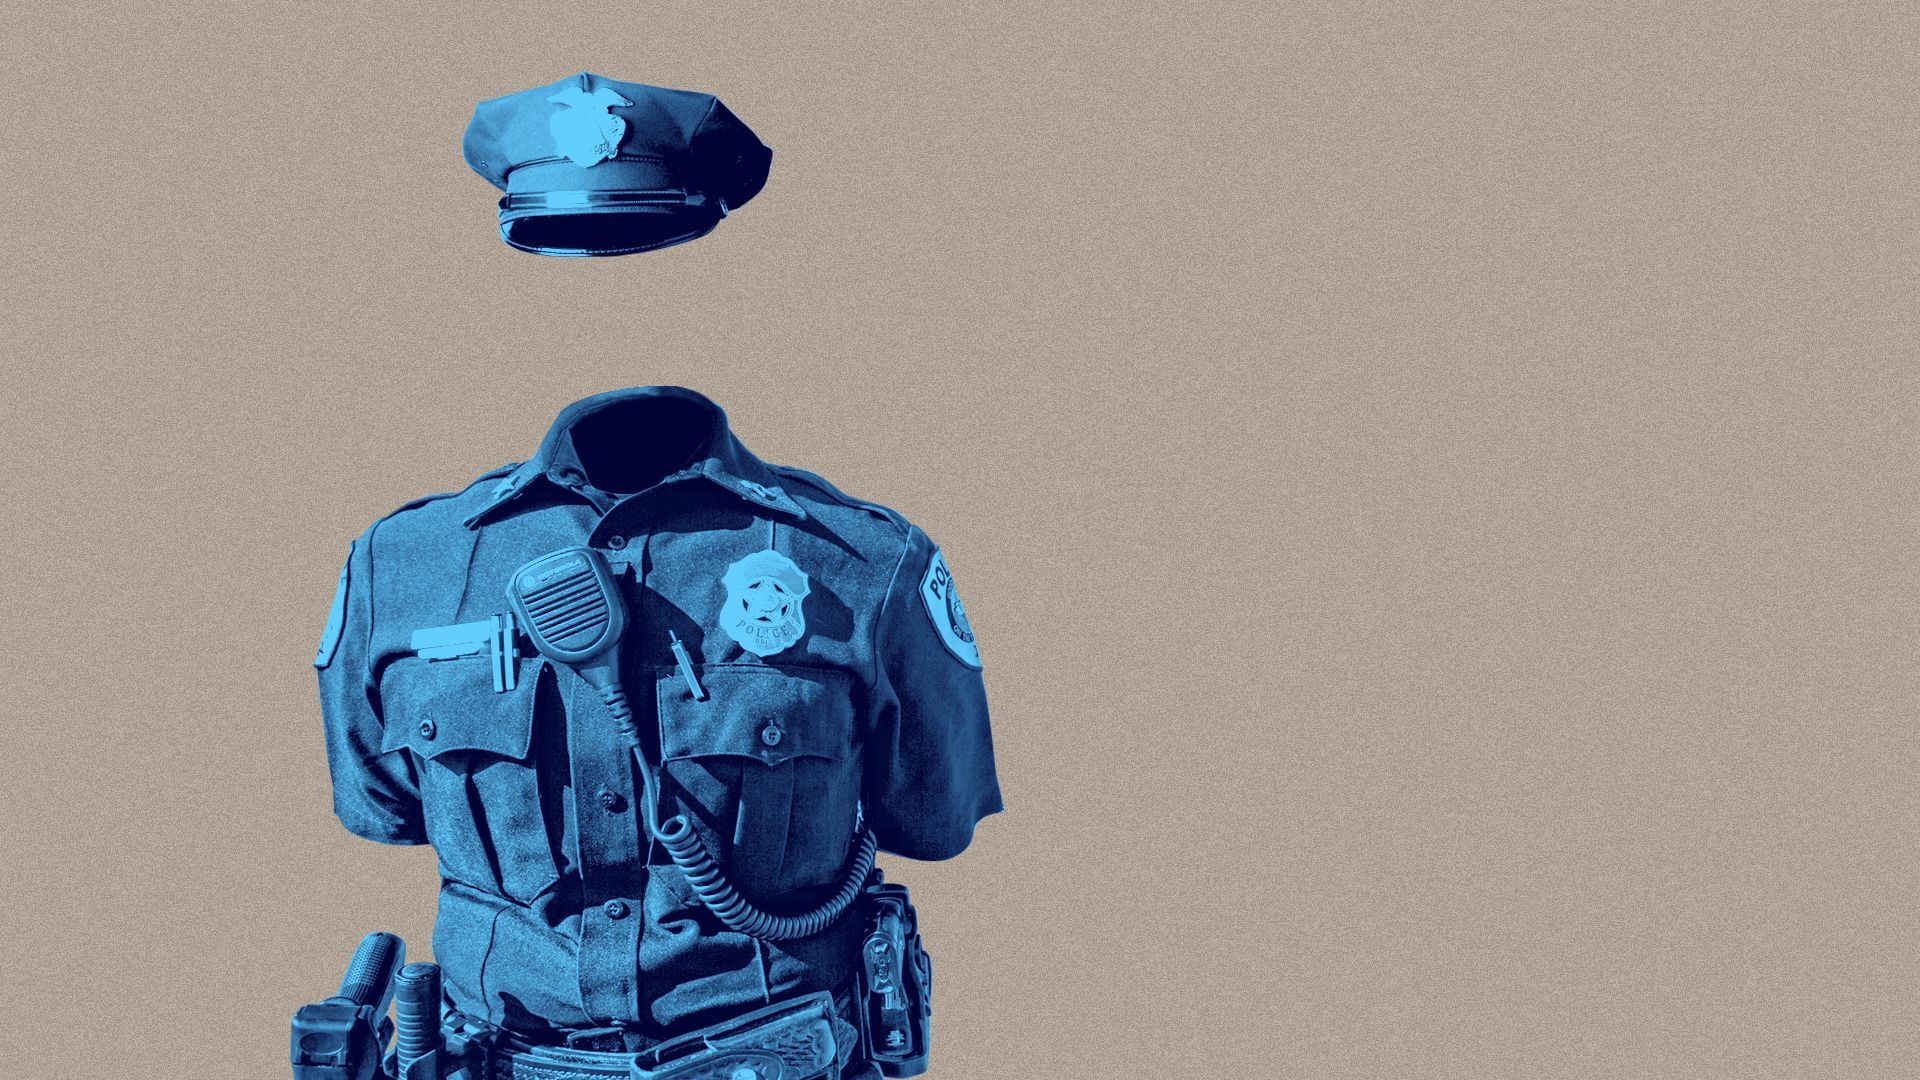 Illustration of a police uniform standing with no person inside it.